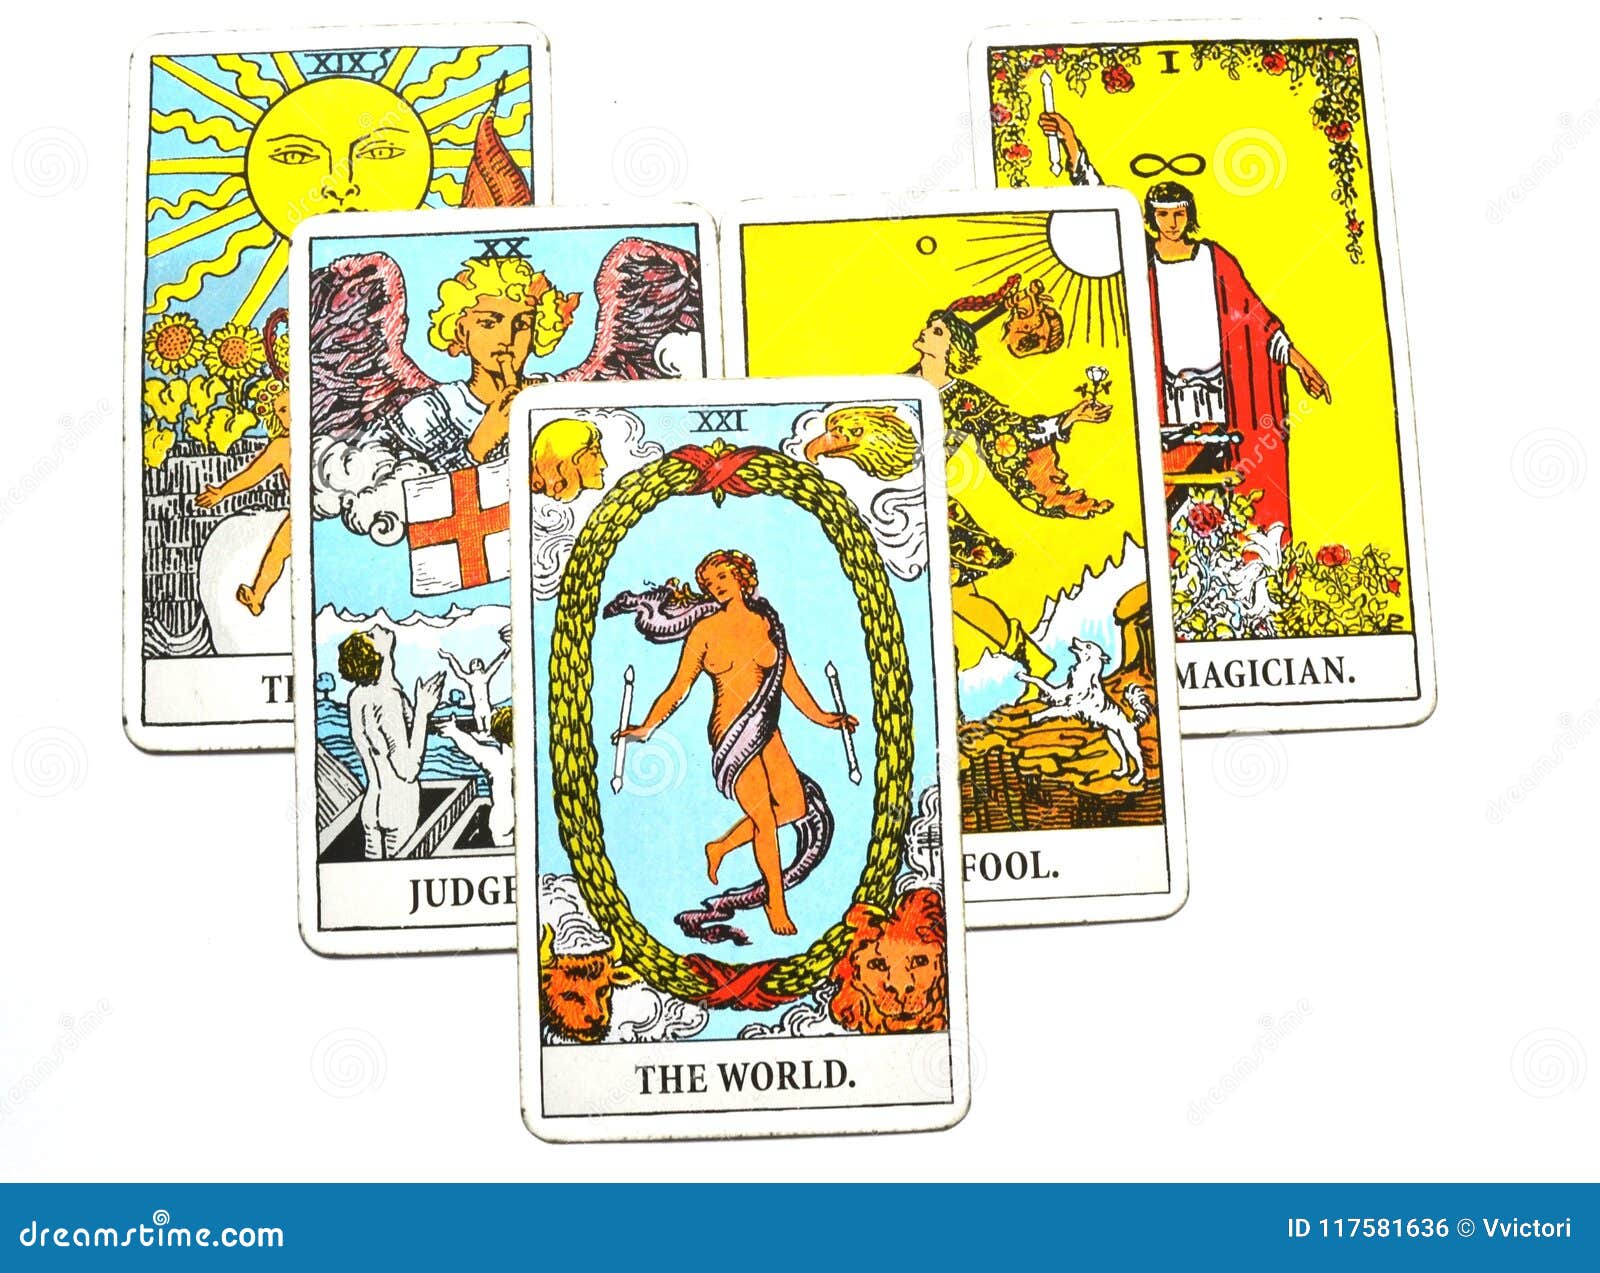 the world tarot card travel succes final stage cycles